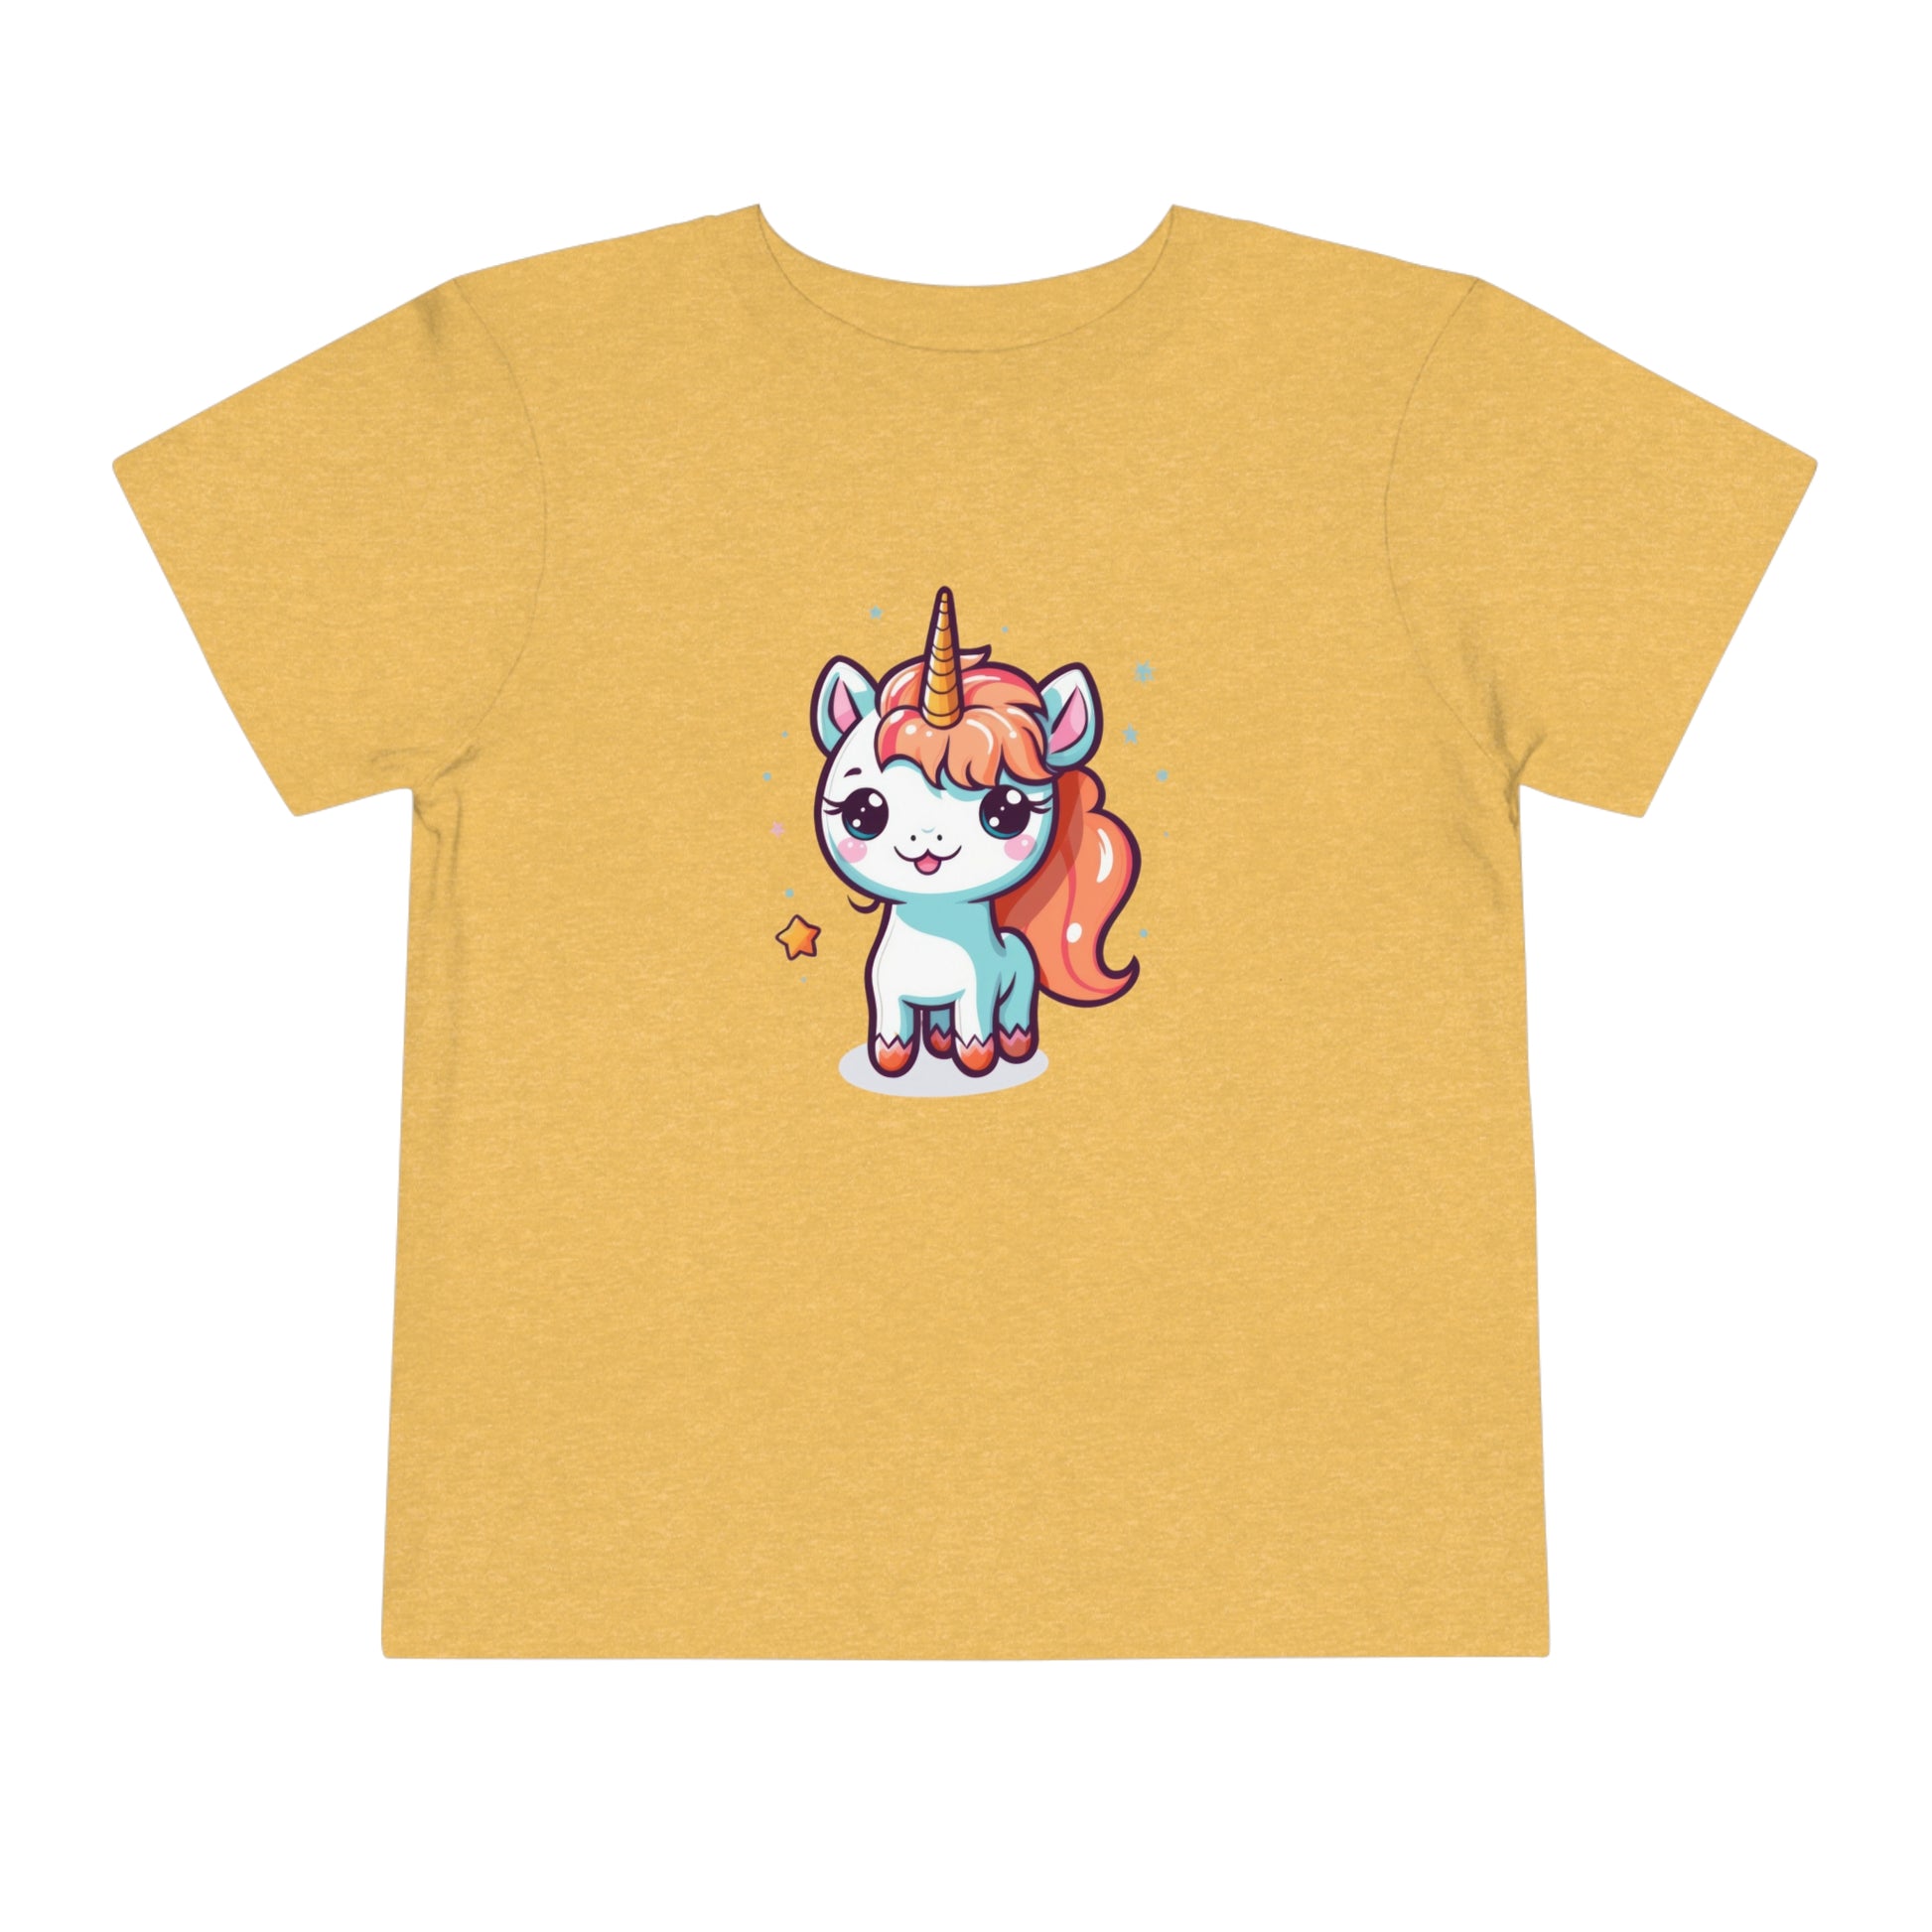 Flat front view of the Heather Yellow Gold shirt